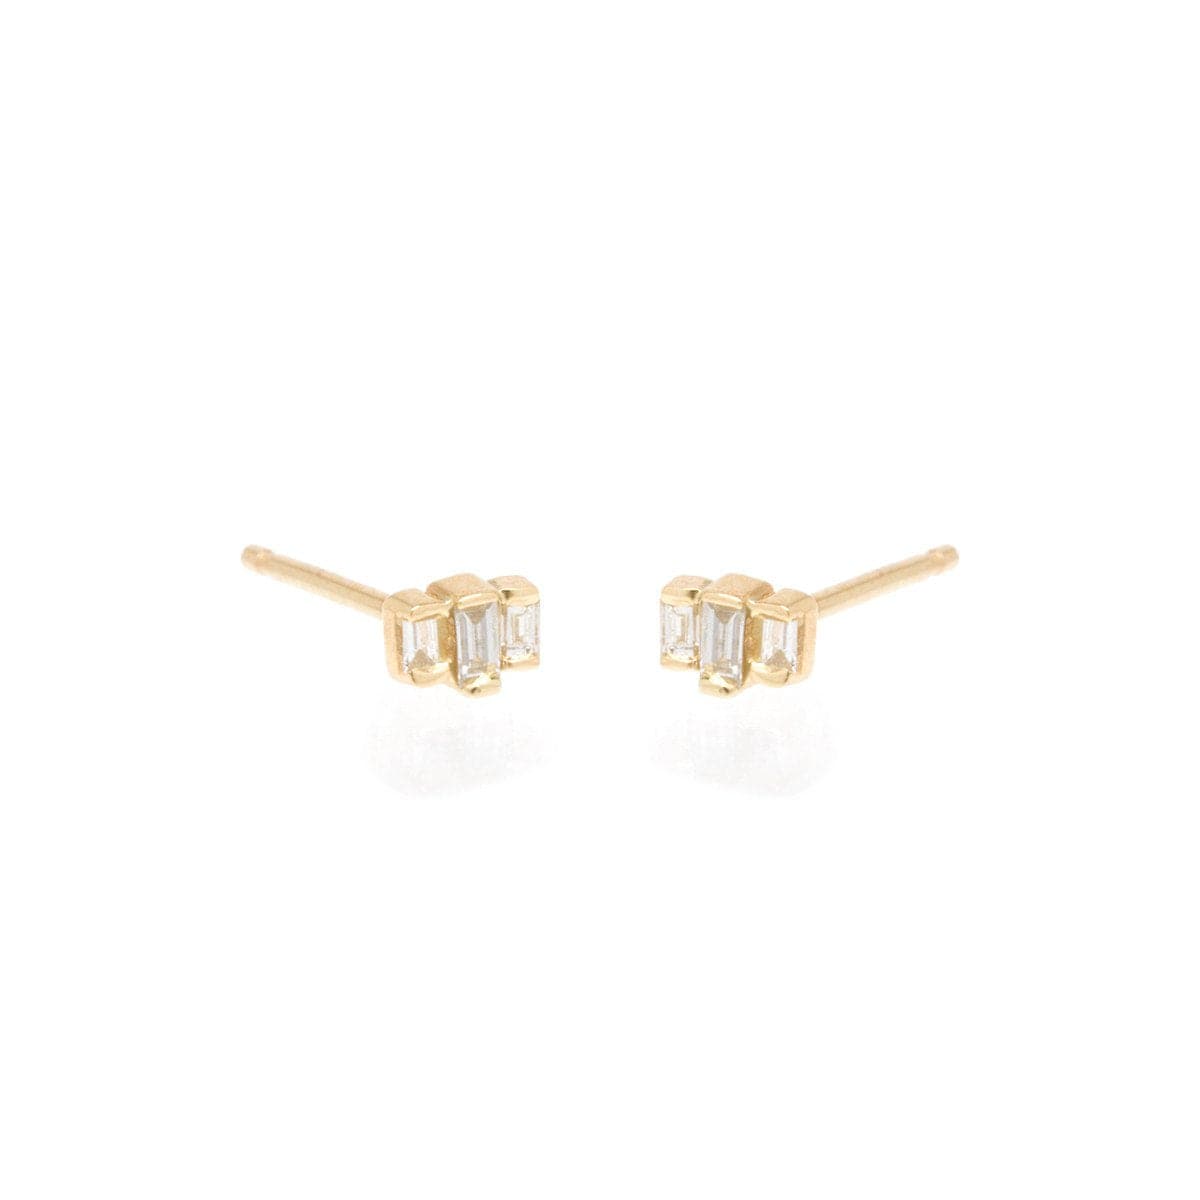 EAR-DIA 14k Gold Tiny 3 Stepped Baguette Studs